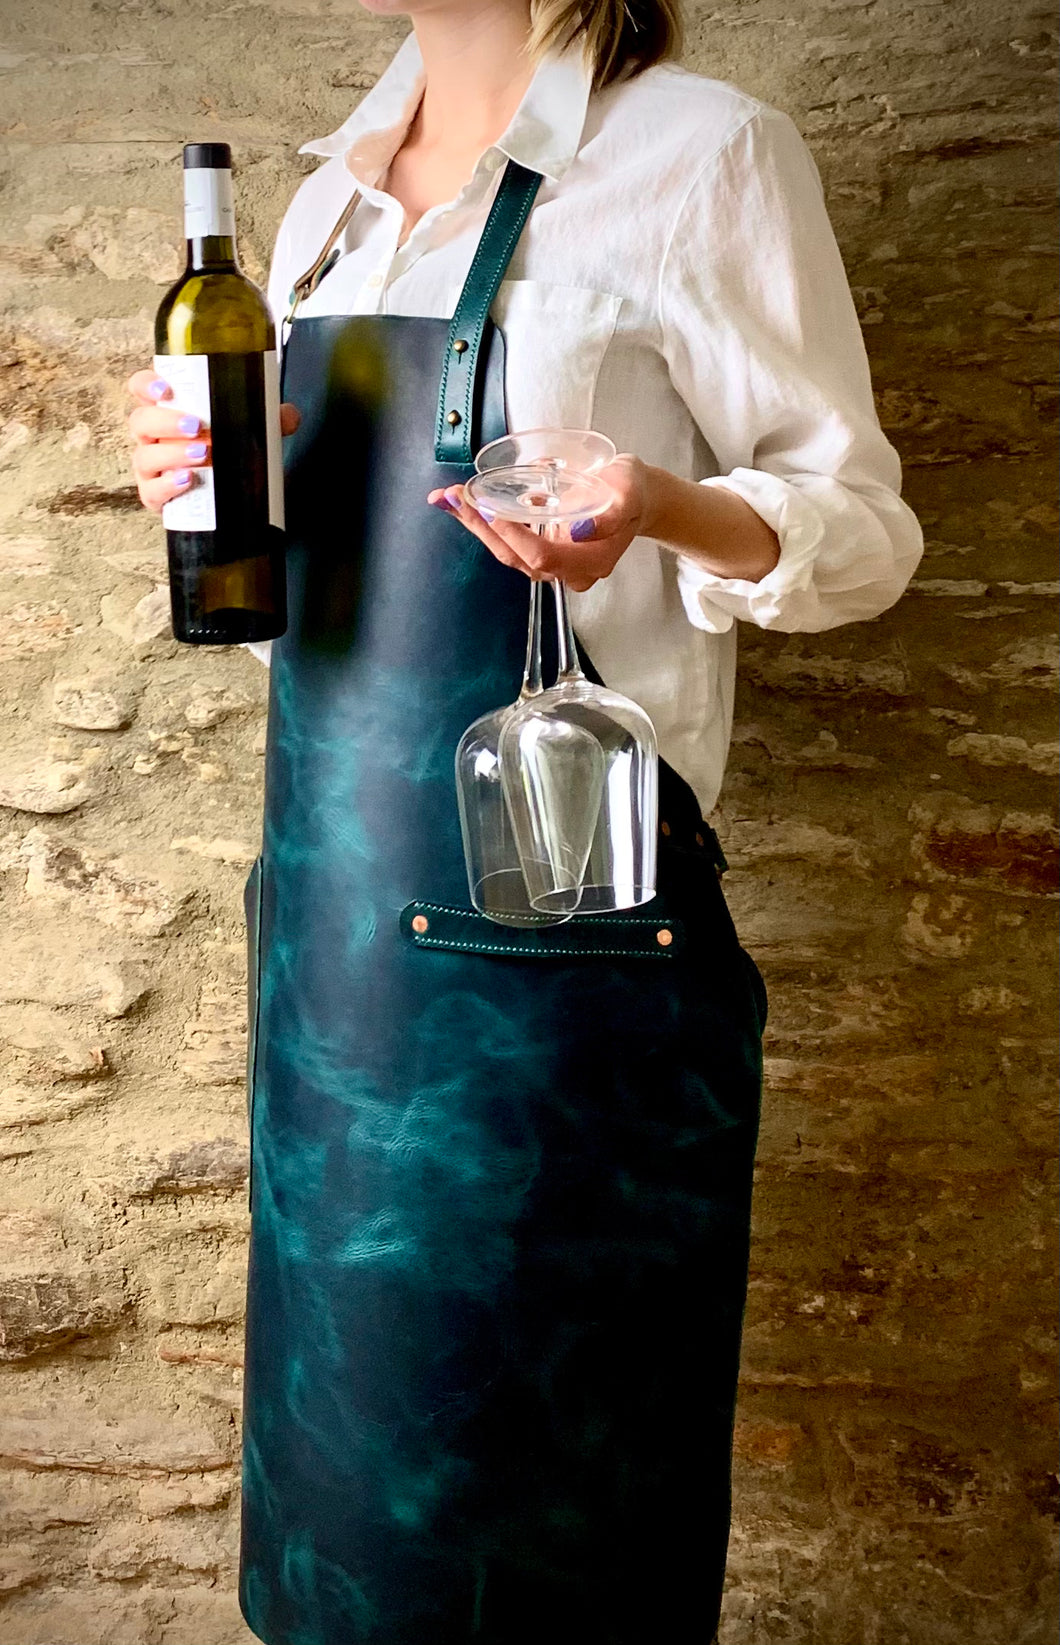 Commissioned ACQUA veg tanned leather apron.  Woman standing against a stone wall backdrop, wearing the apron over a white shirt, holding bottle of wine and two wine glasses.